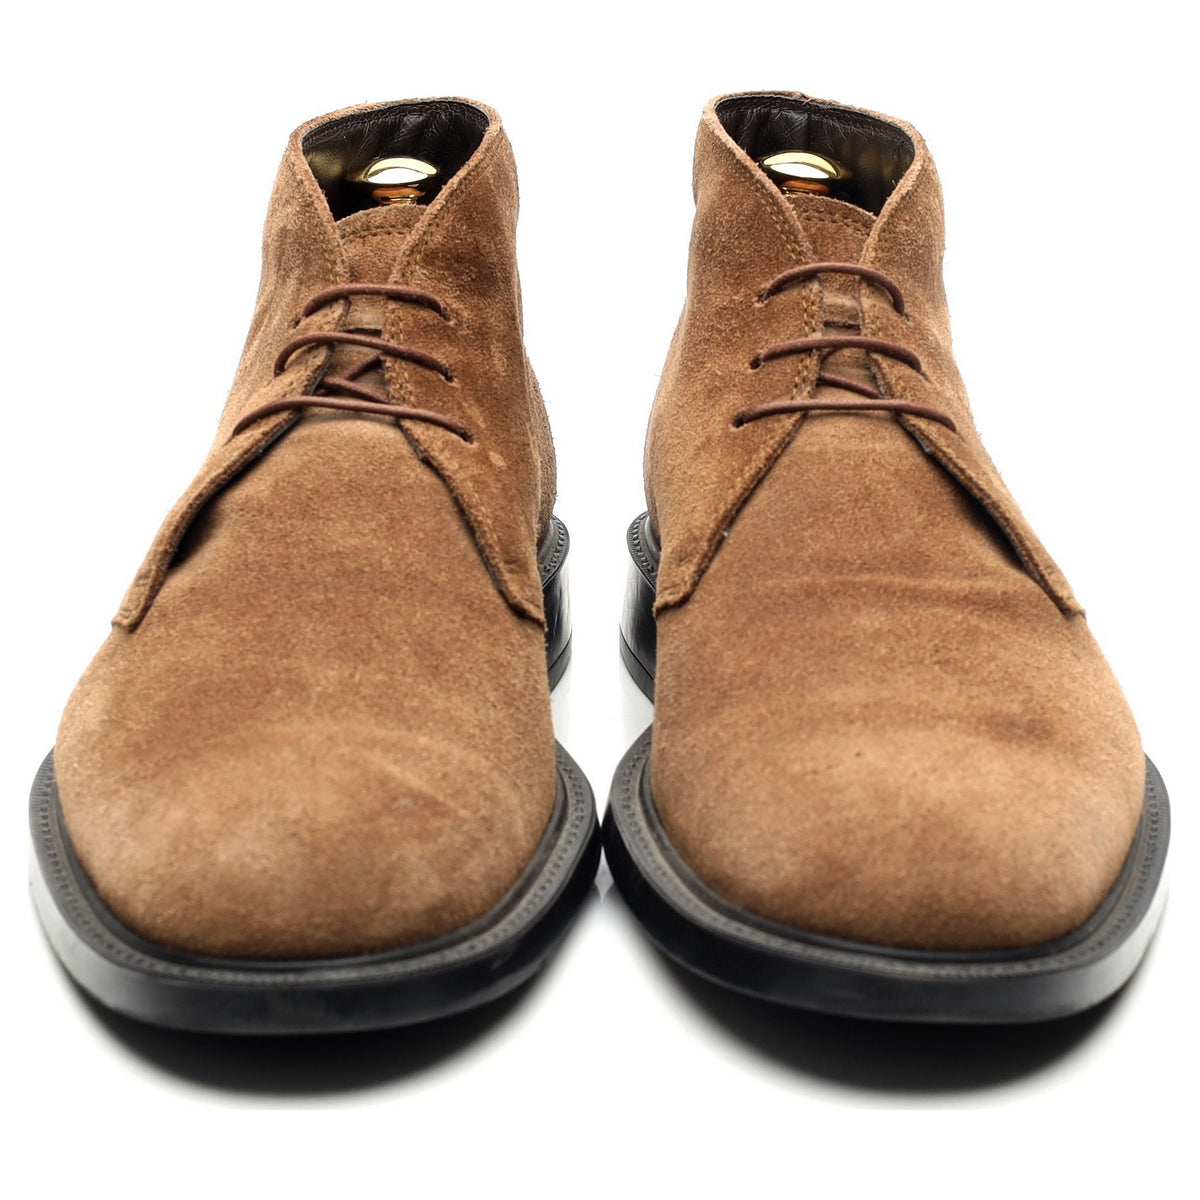 Brown Suede Chukka Boots UK 9.5